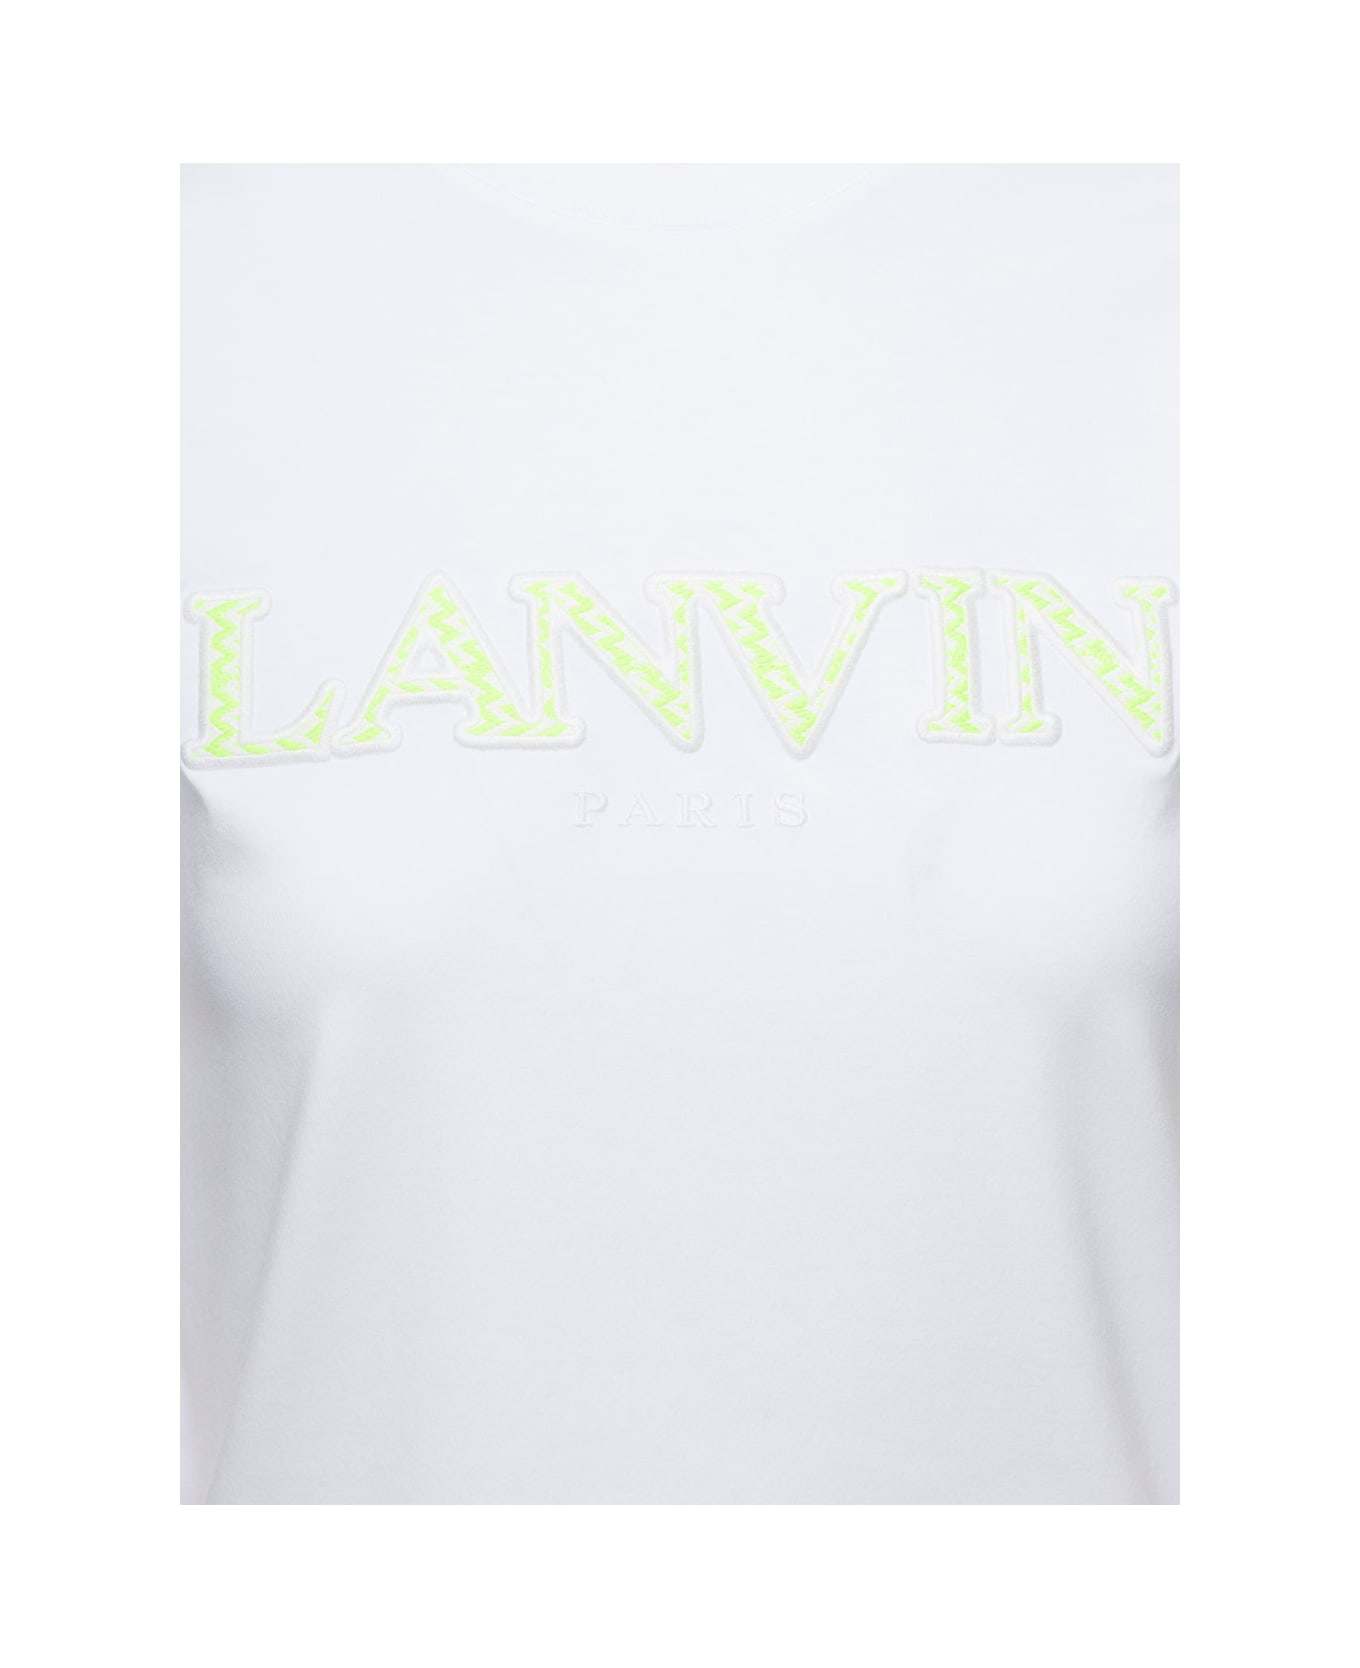 Lanvin White Classic Fit T-shirt With Printed Logo In Cotton Woman - White